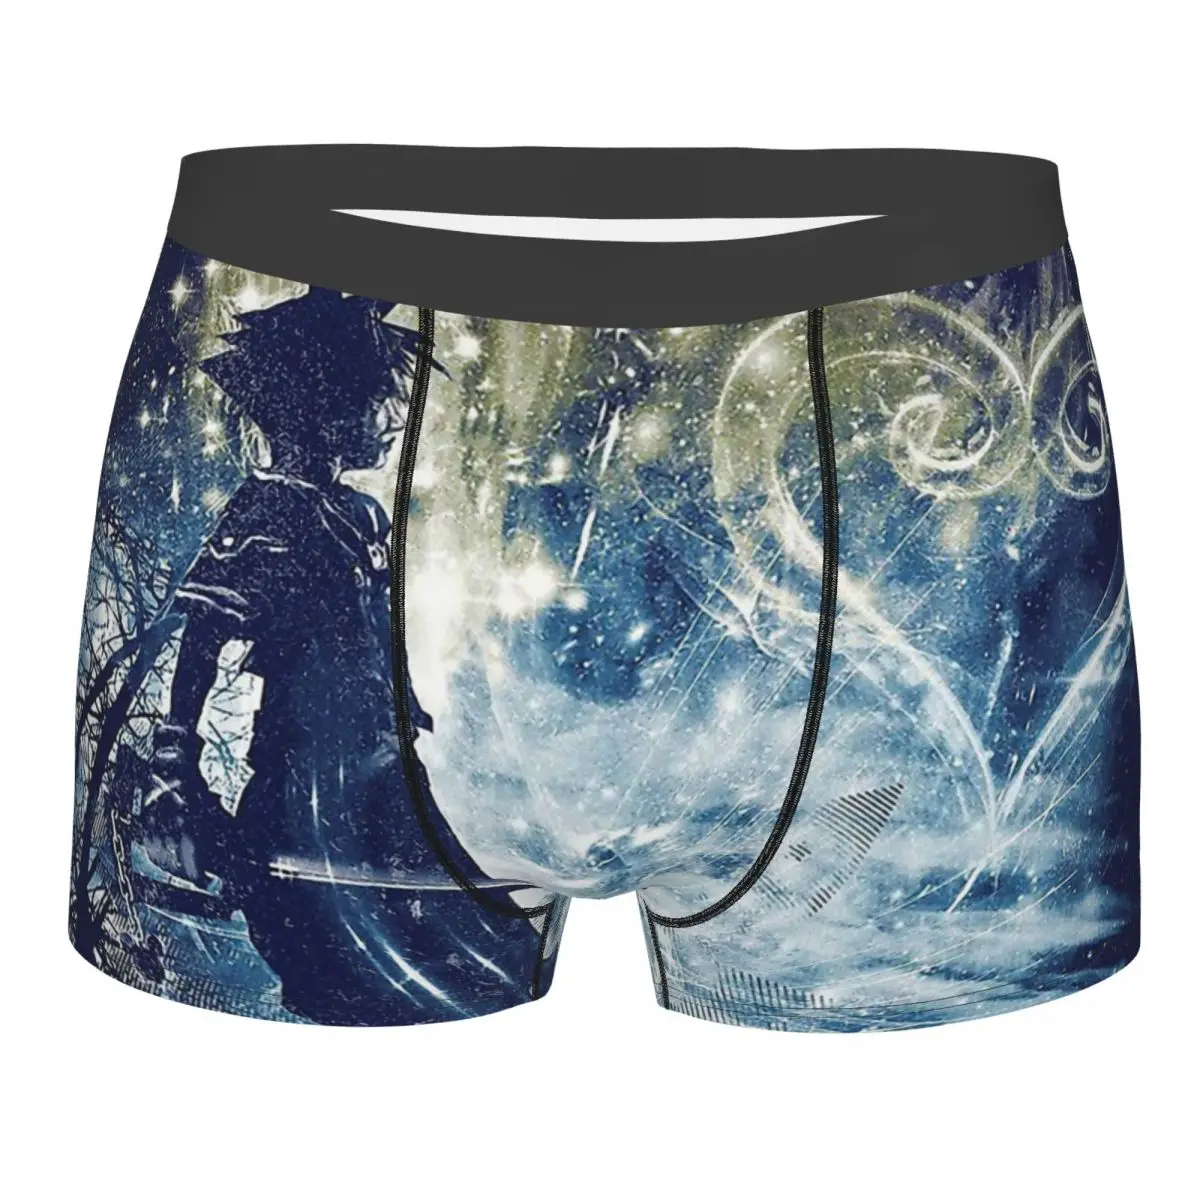 

A Path To The Heart Man's Boxer Briefs Kingdom Hearts Highly Breathable Underwear Top Quality Print Shorts Birthday Gifts